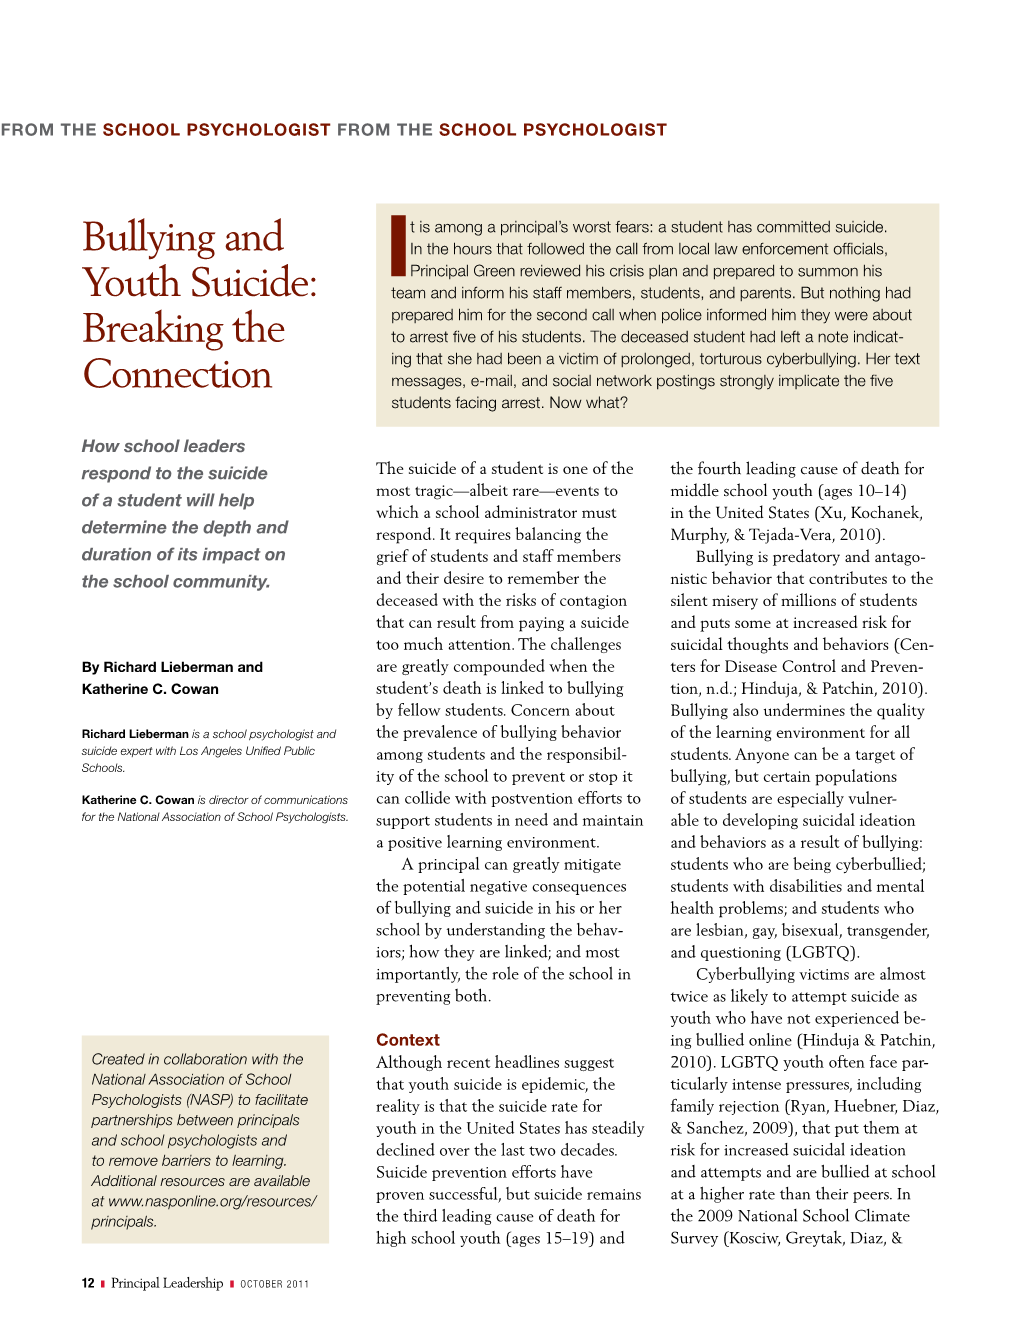 Bullying and Youth Suicide: Breaking the Connection